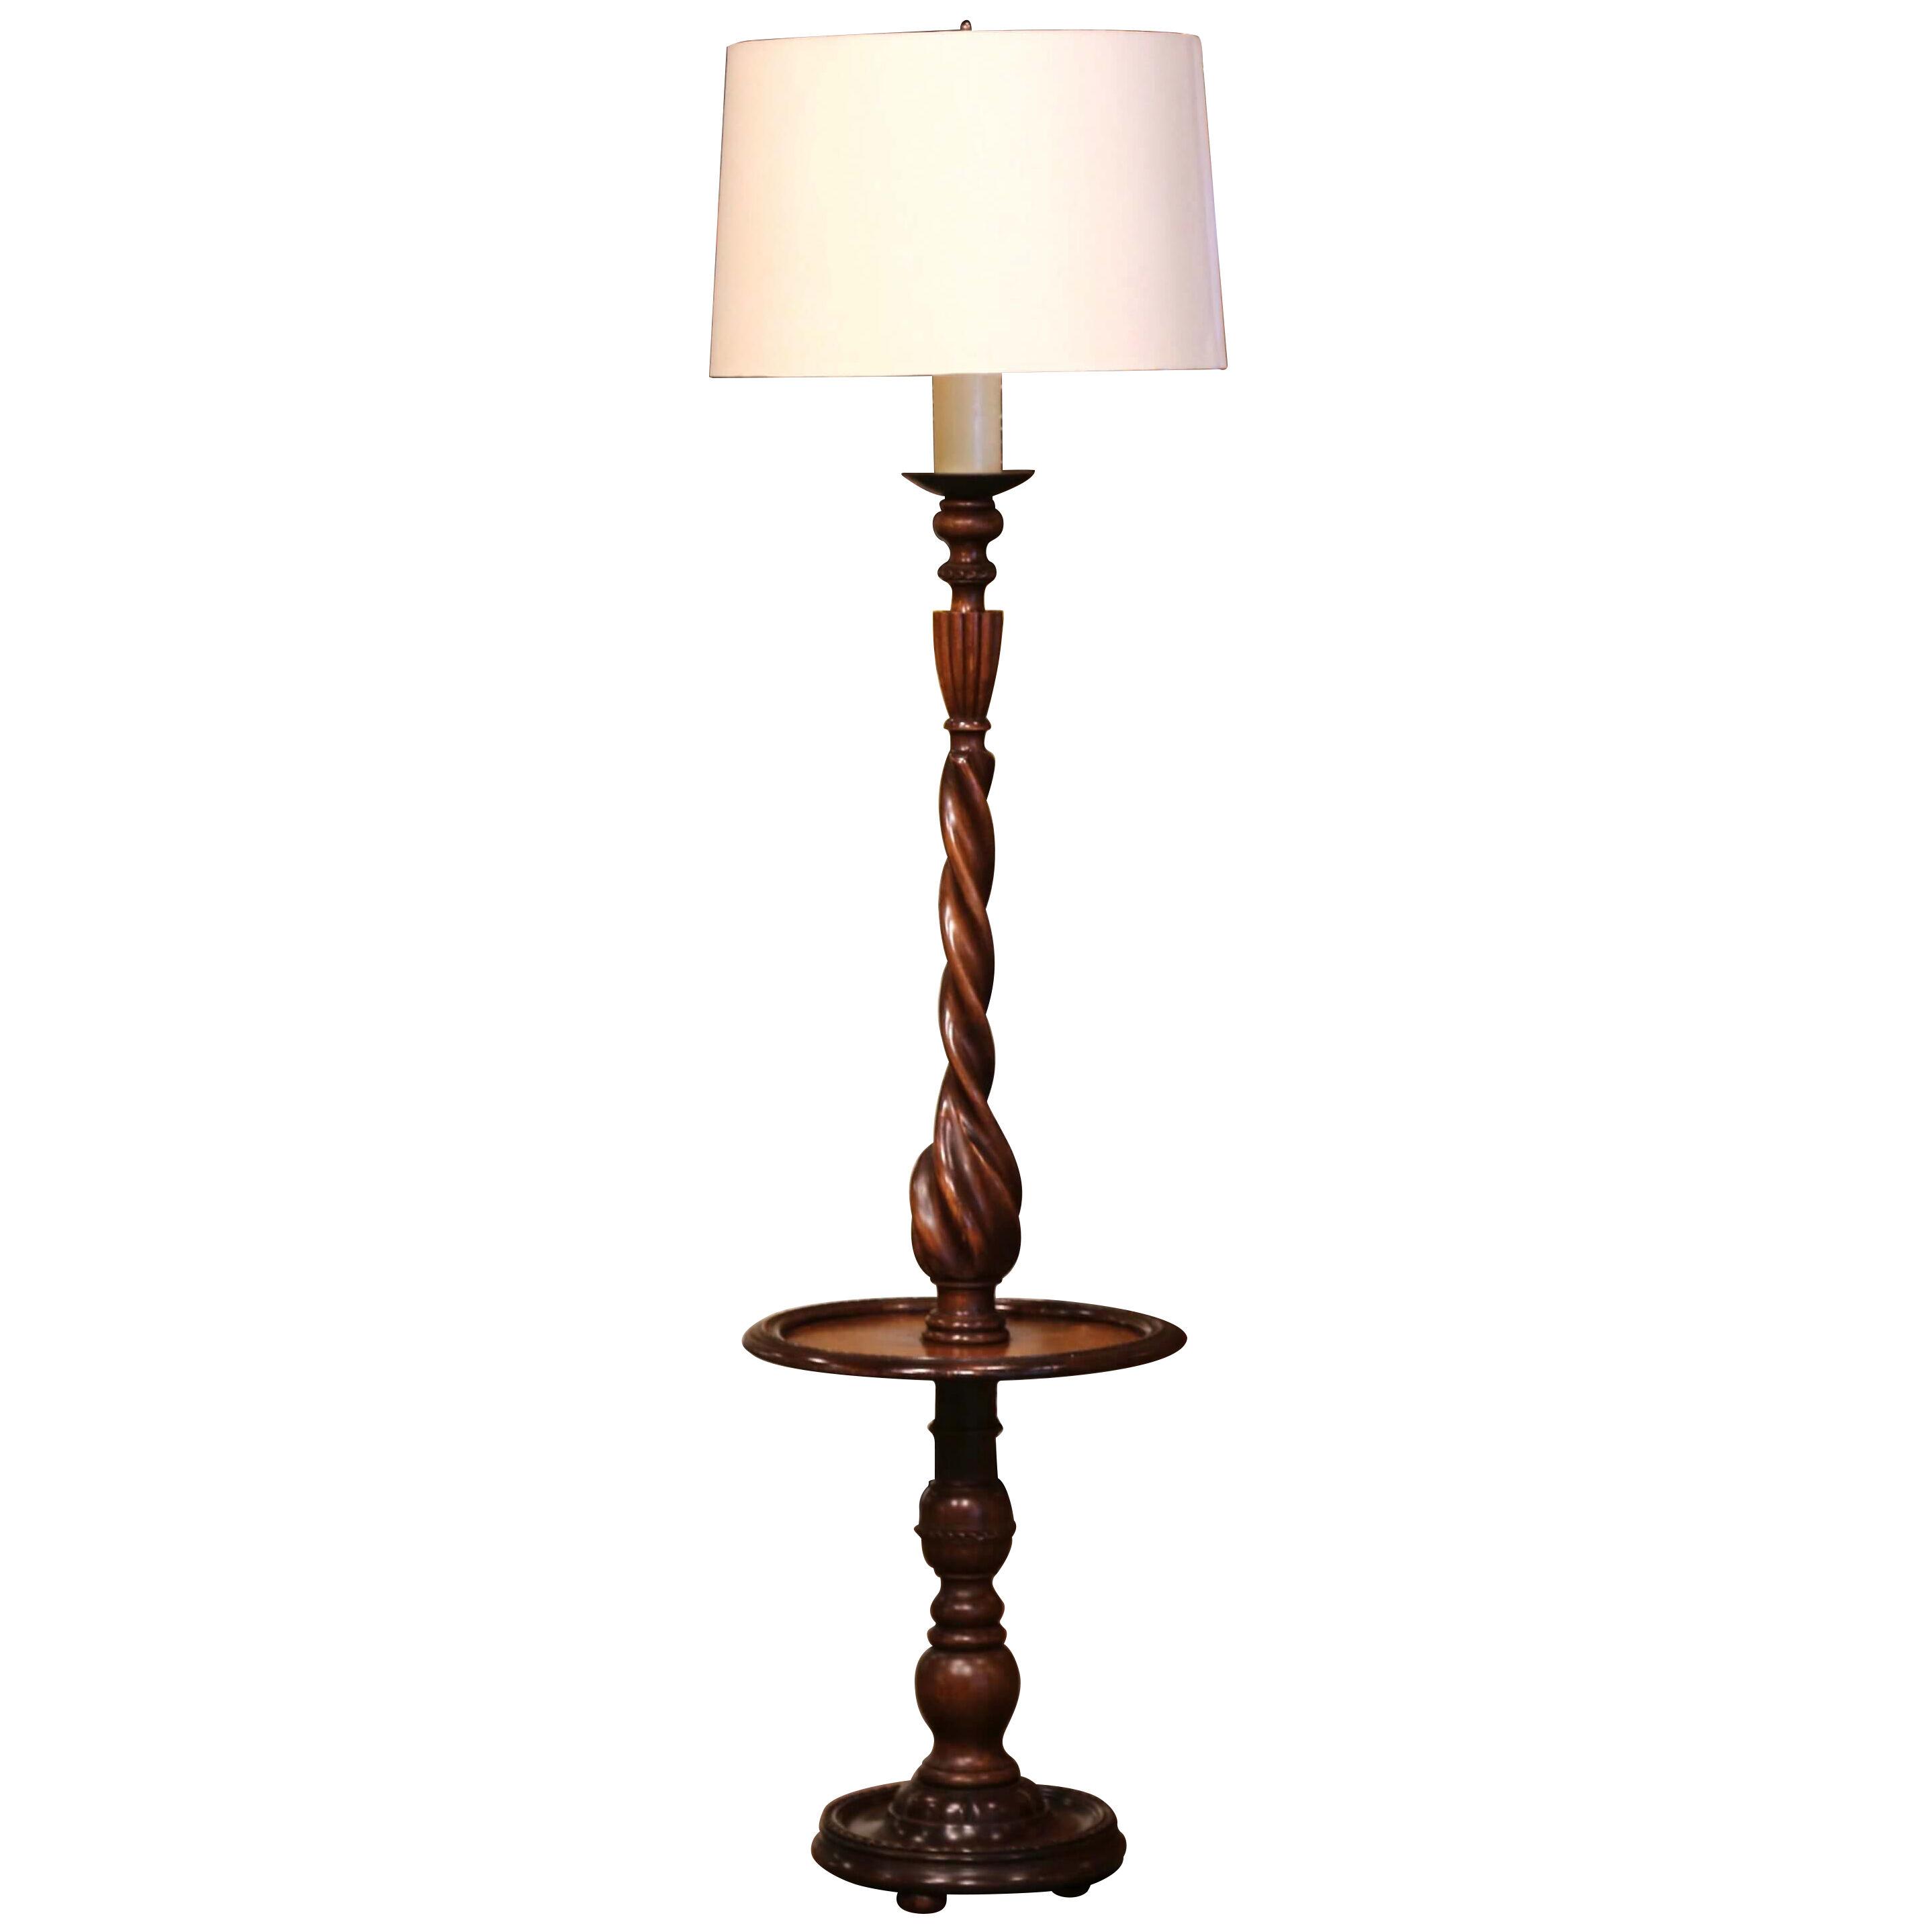 Mid-Century French Carved Barley Twist Two-Light Floor Lamp with Attached Table